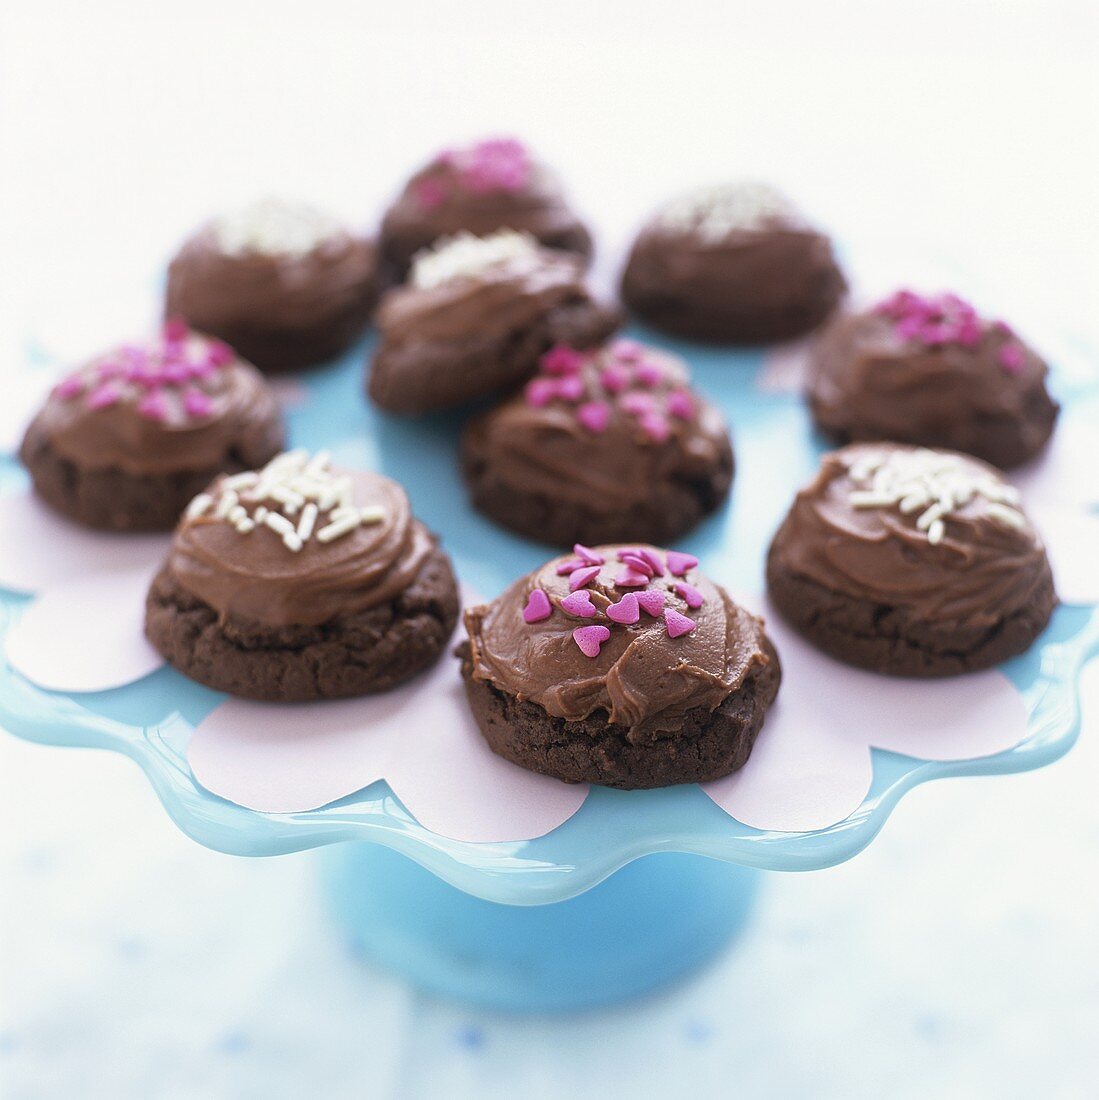 Chocolate biscuits with chocolate icing and sprinkles